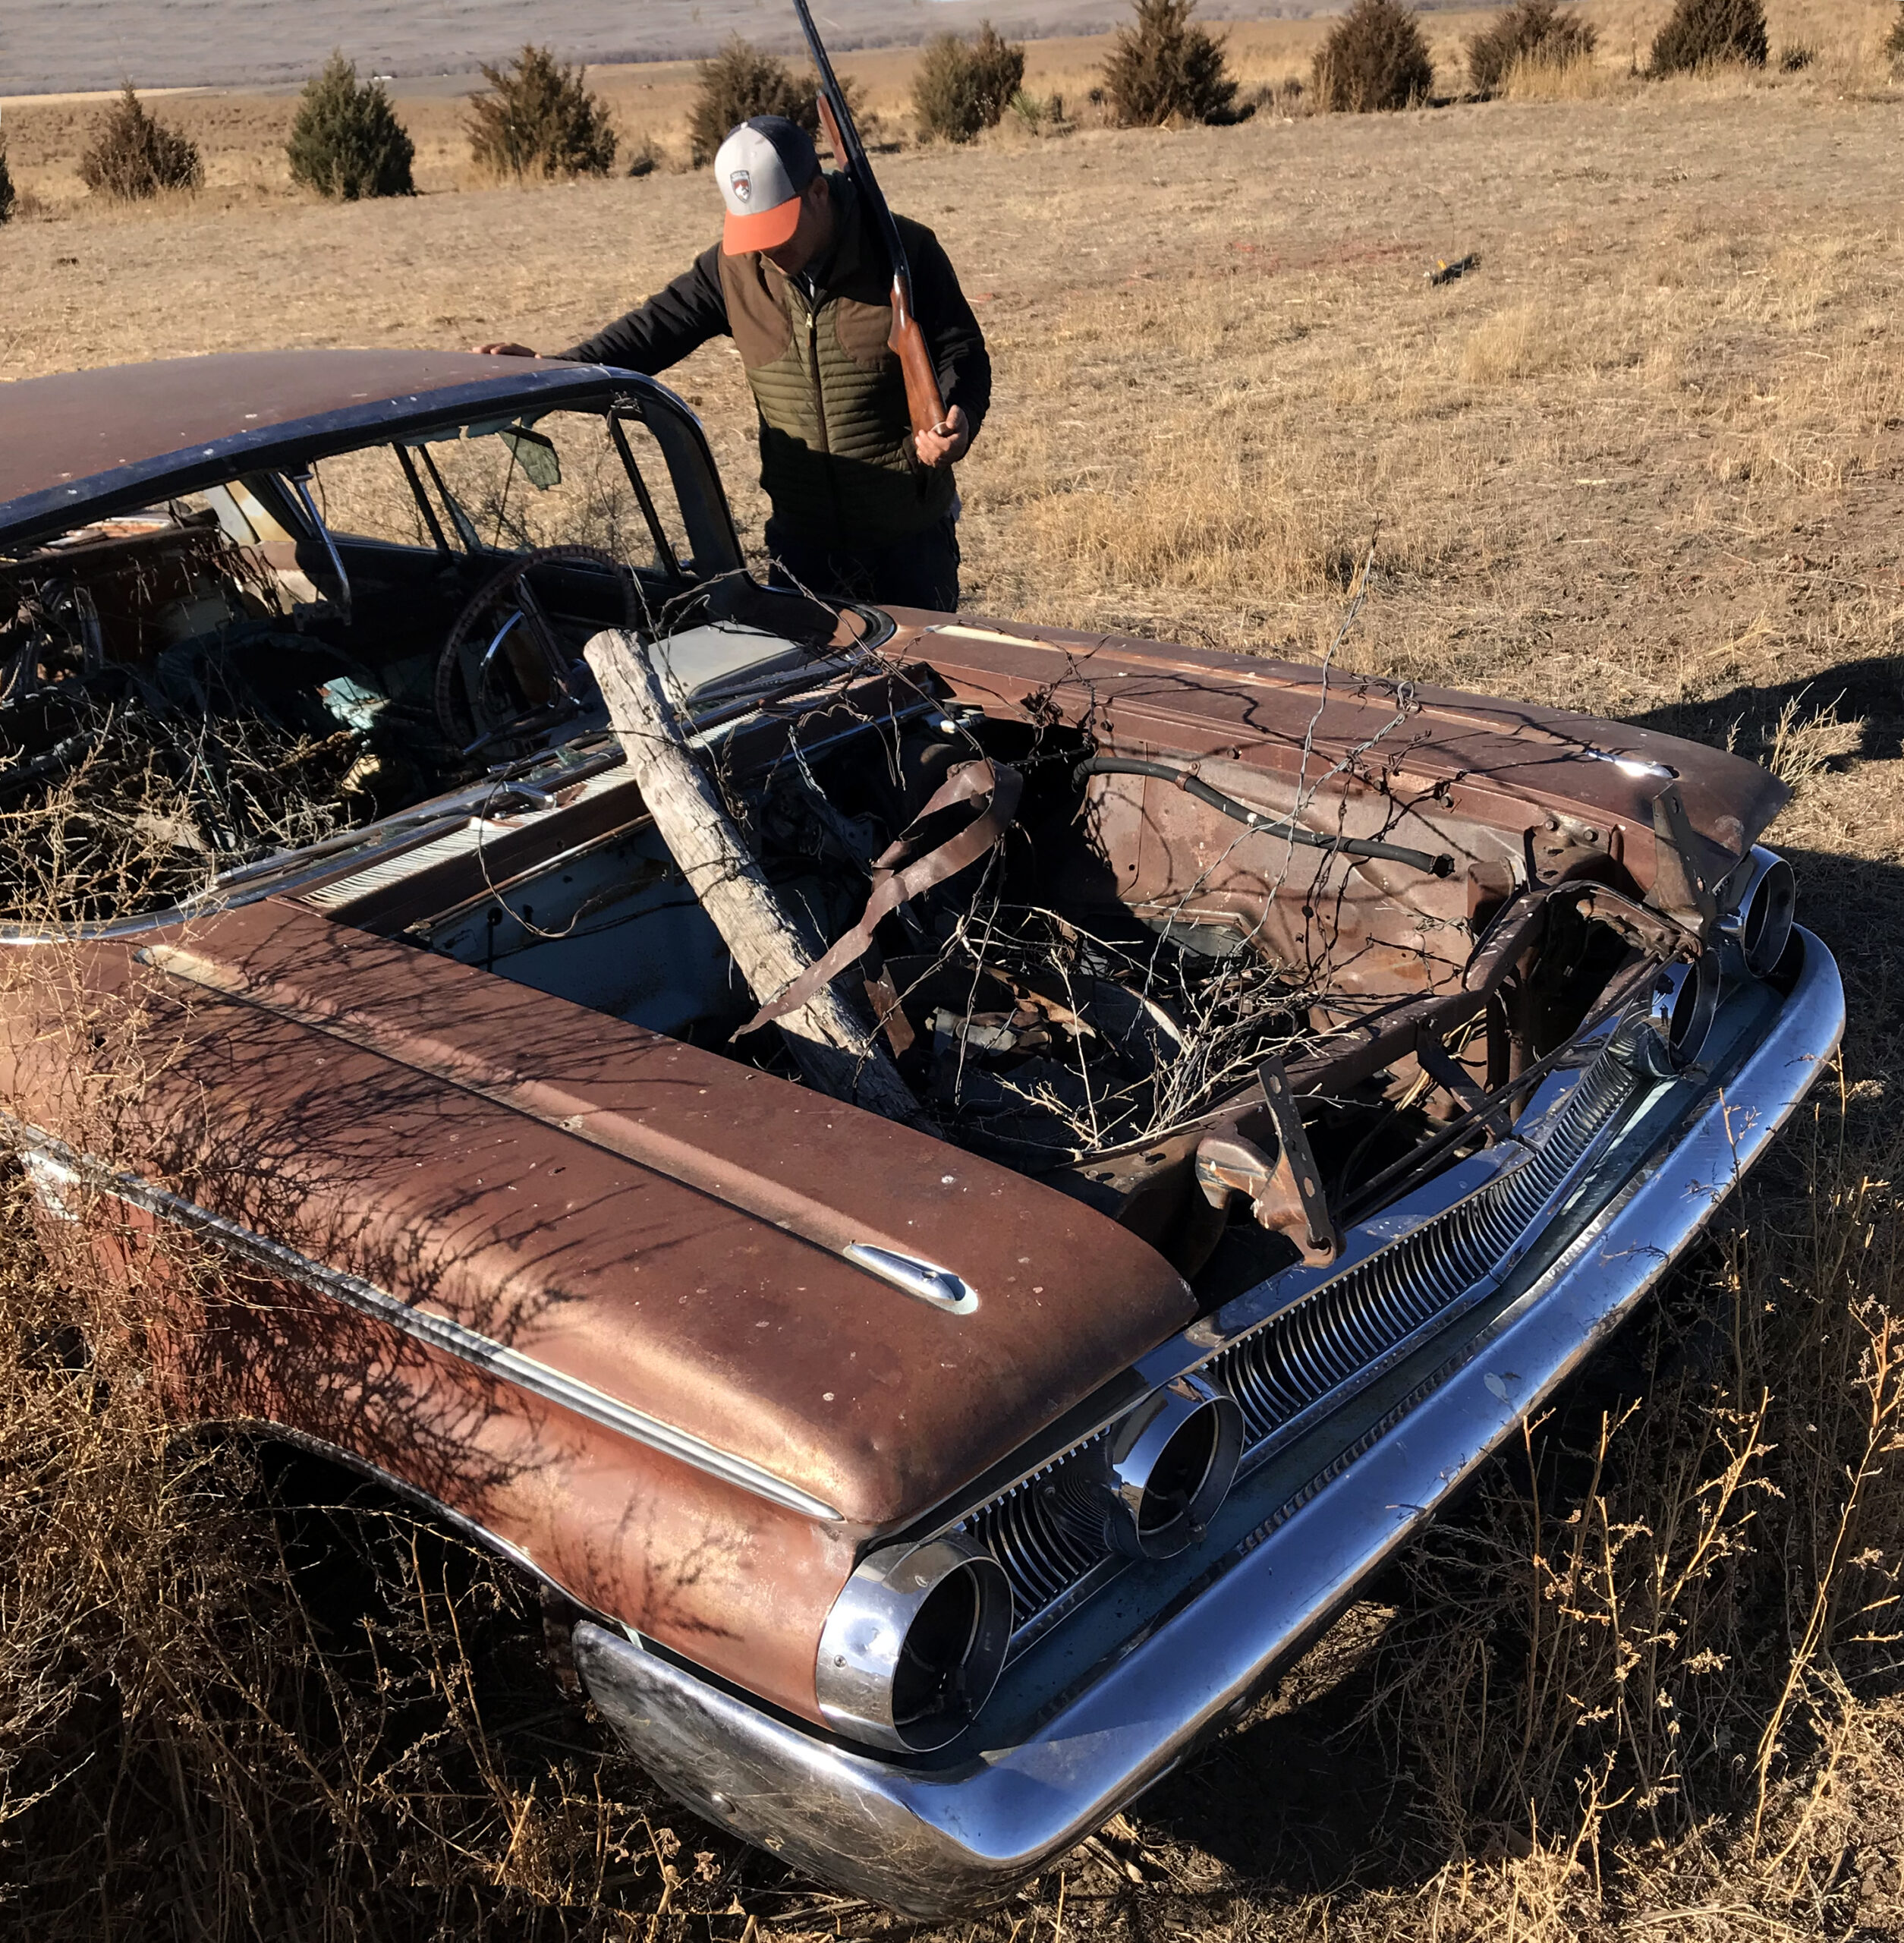 The rusted out hood of a Mercury Monterey car on a ranch in Eastern Colorado.